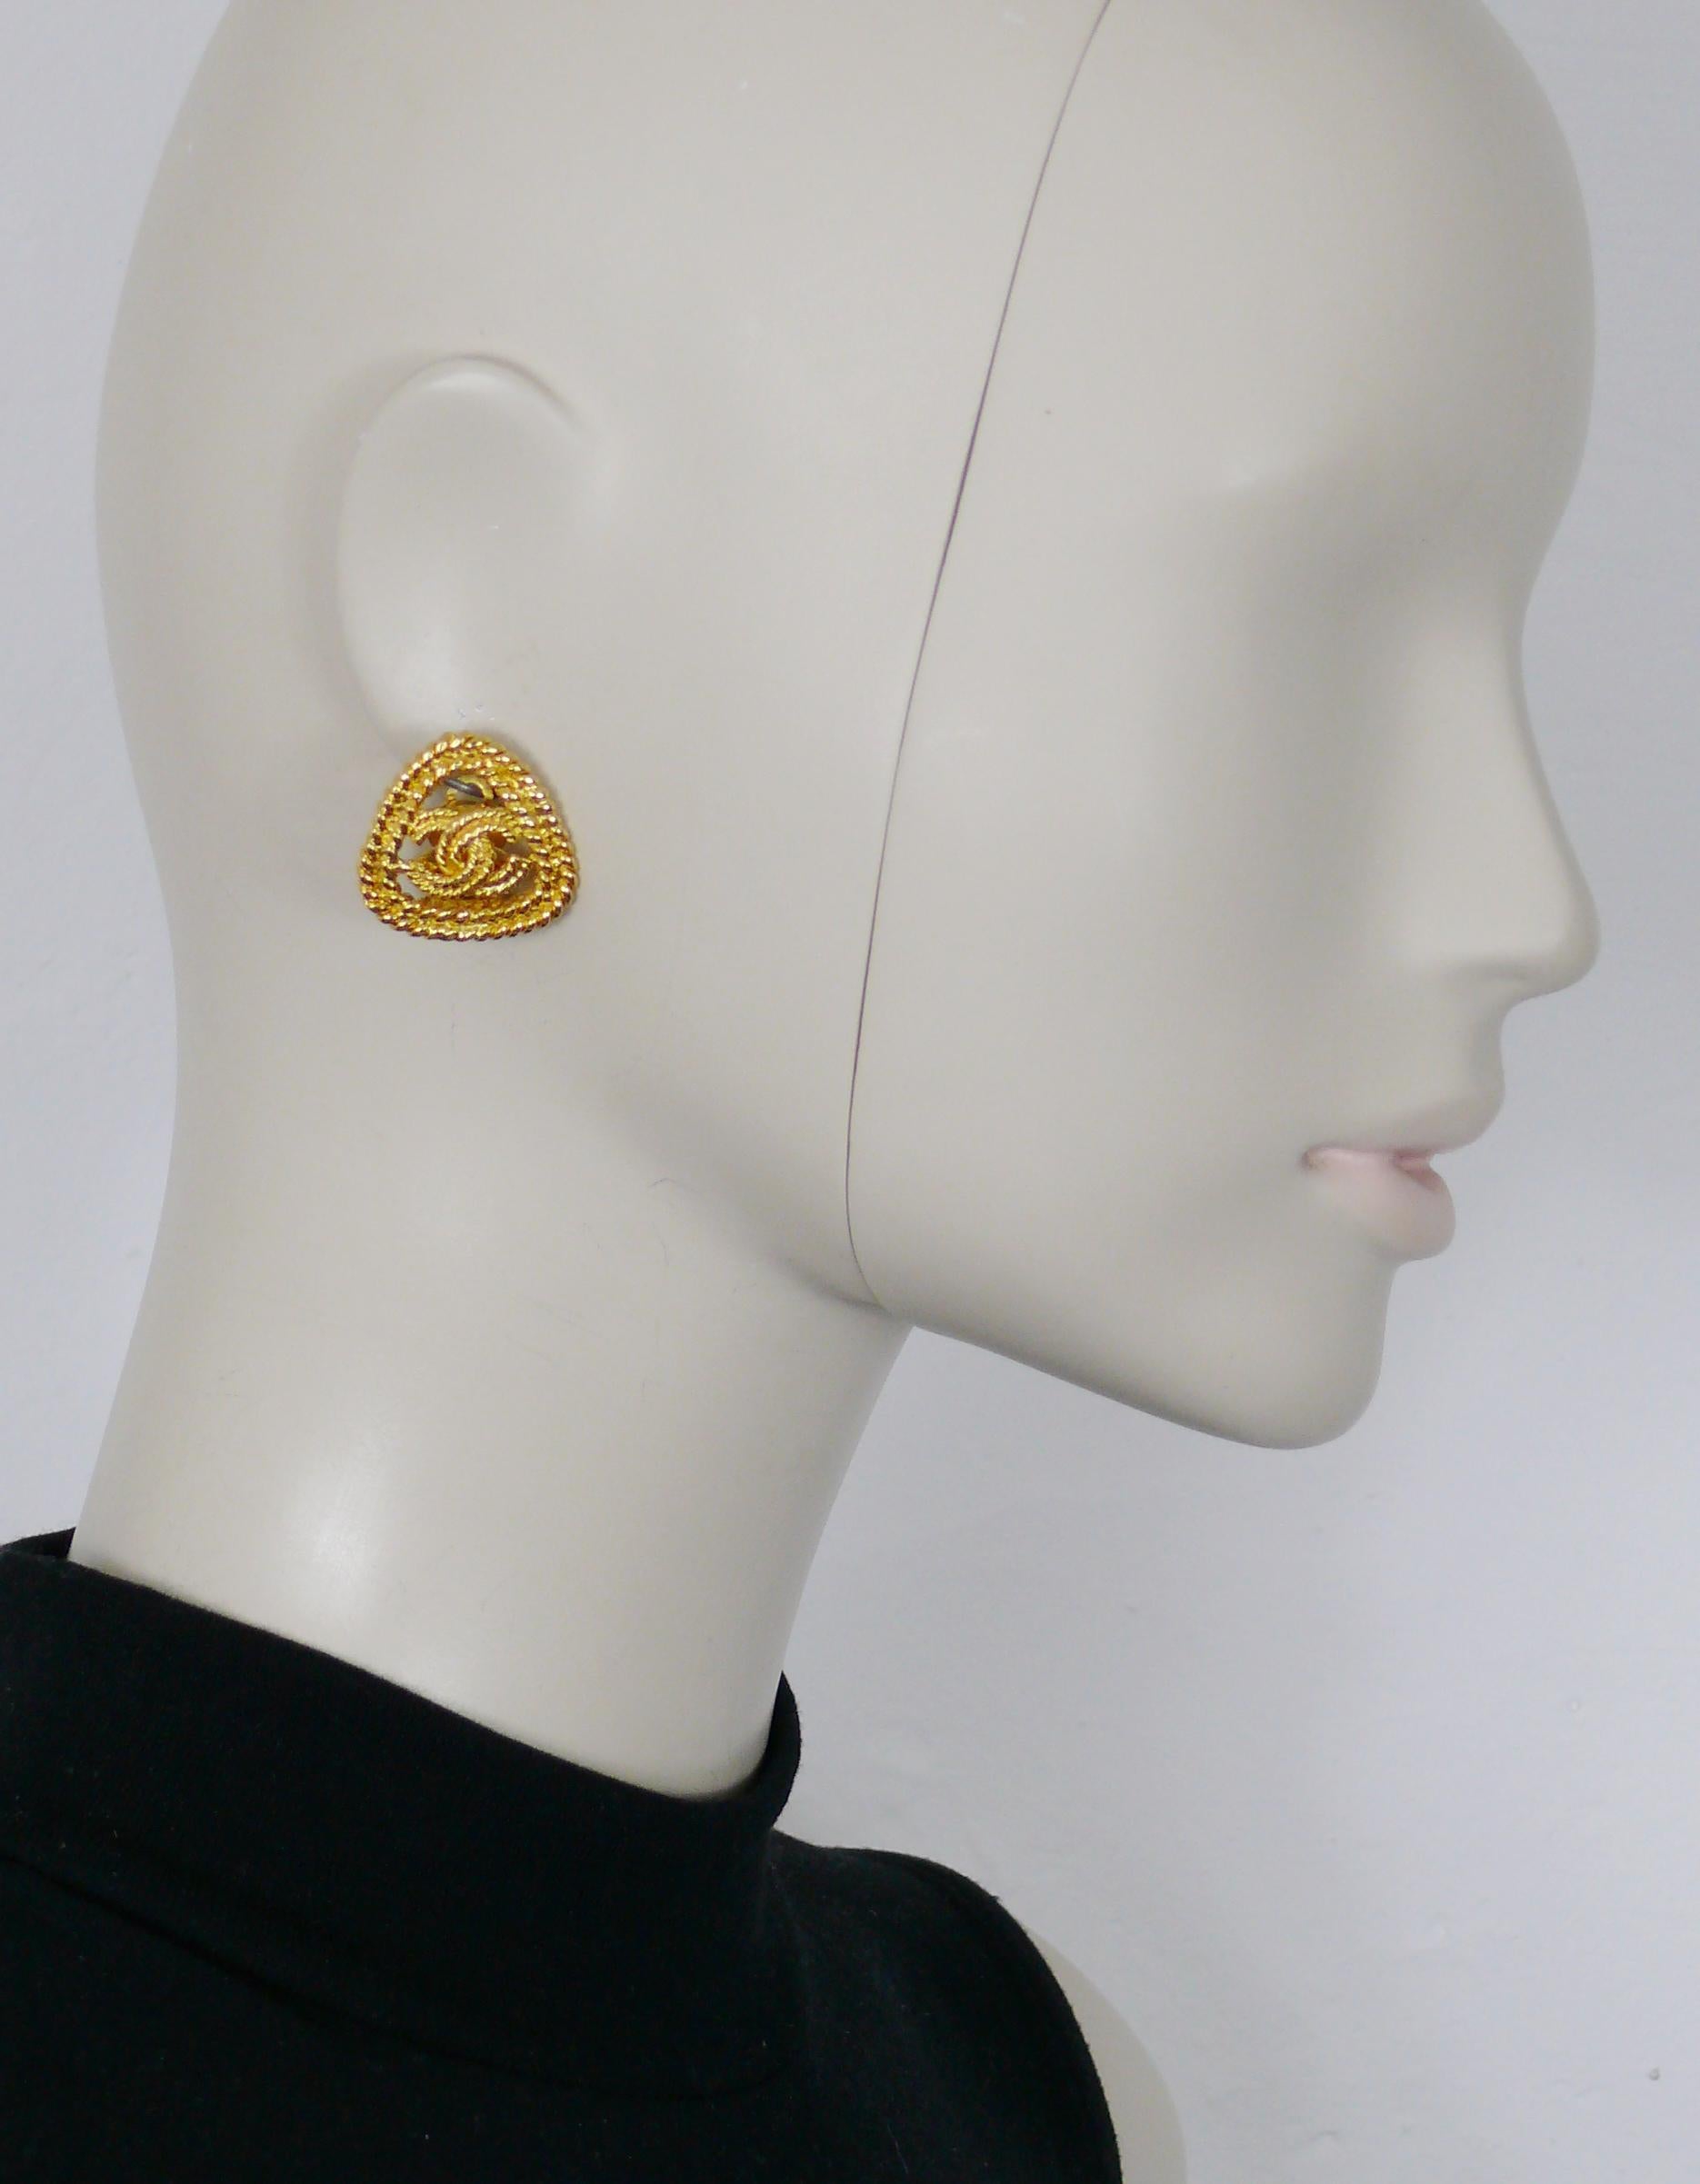 CHANEL vintage gold toned braided design clip-on earrings featuring a CC logo at the center.

Collection 28 (collection year : 1993).

Embossed CHANEL 28 Made in France.

Indicative measurements : max. height approx. 2.6 cm (1.02 inches) / max.